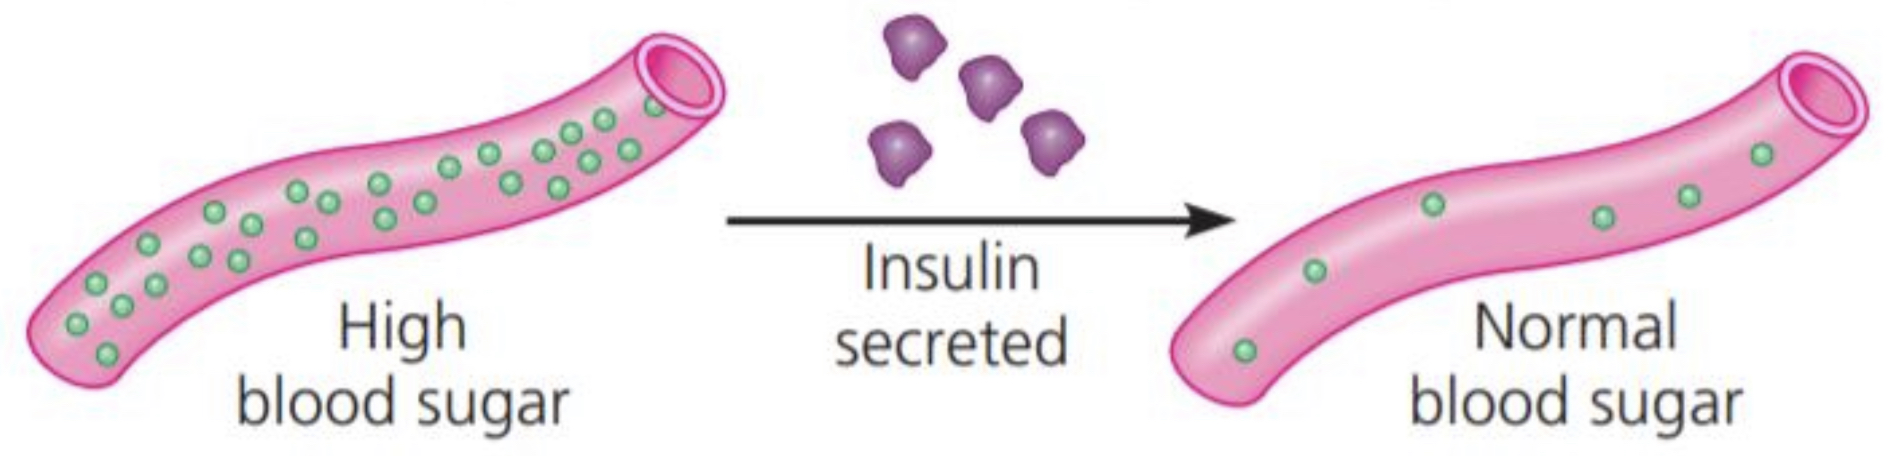 <p>Function: coordination of an organism’s activities Example: INSULIN, a hormone secreted by the pancreas, causes other tissues to take up glucose, thus regulating blood sugar concentration</p>